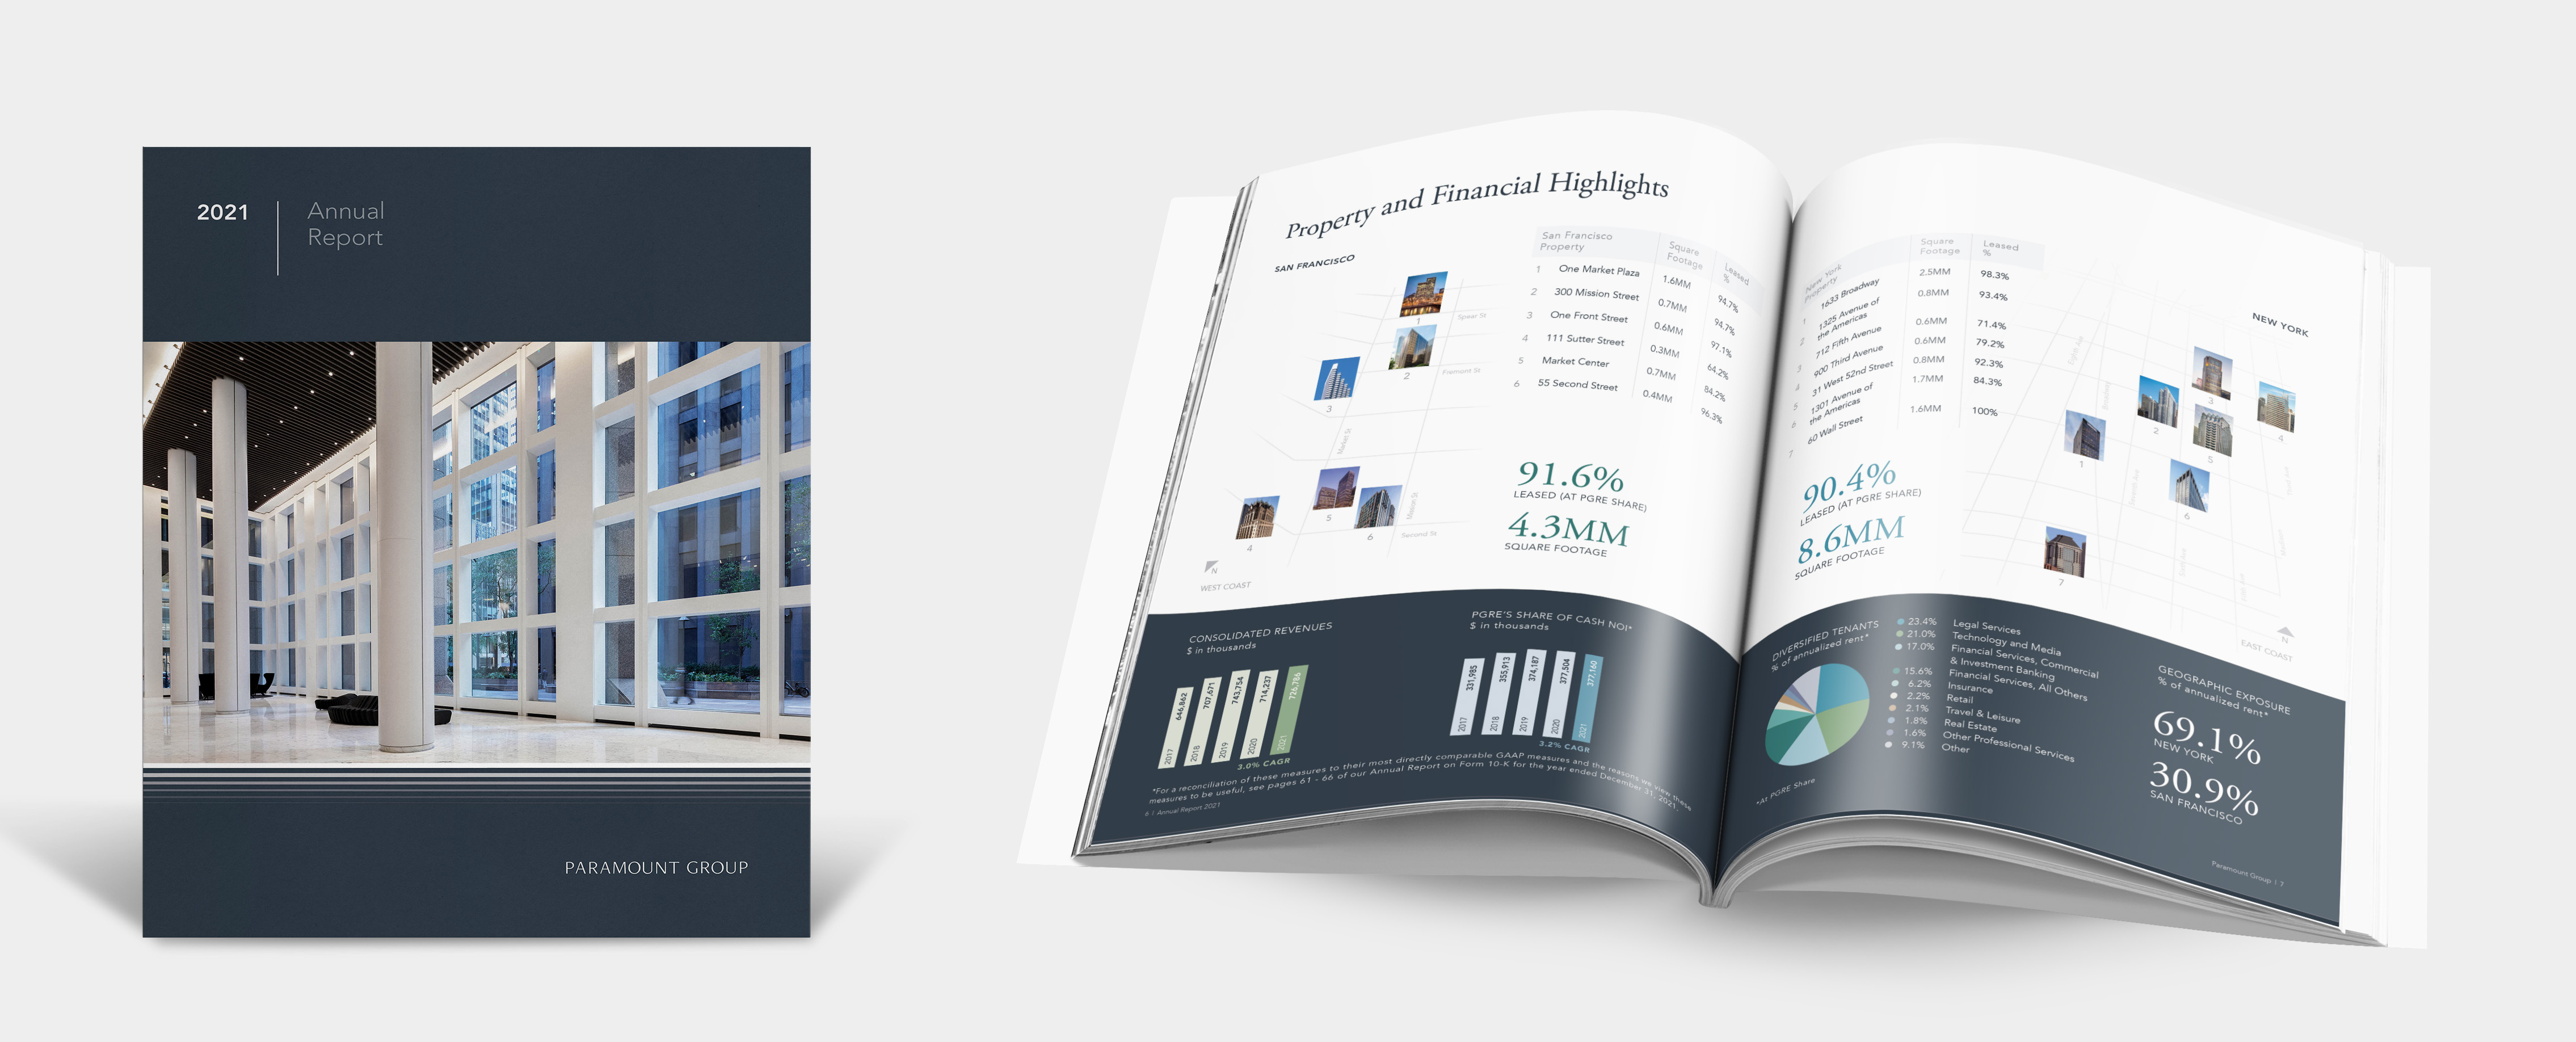 The cover of the Paramount 2021 Annual report along with the property and financial highlights spread